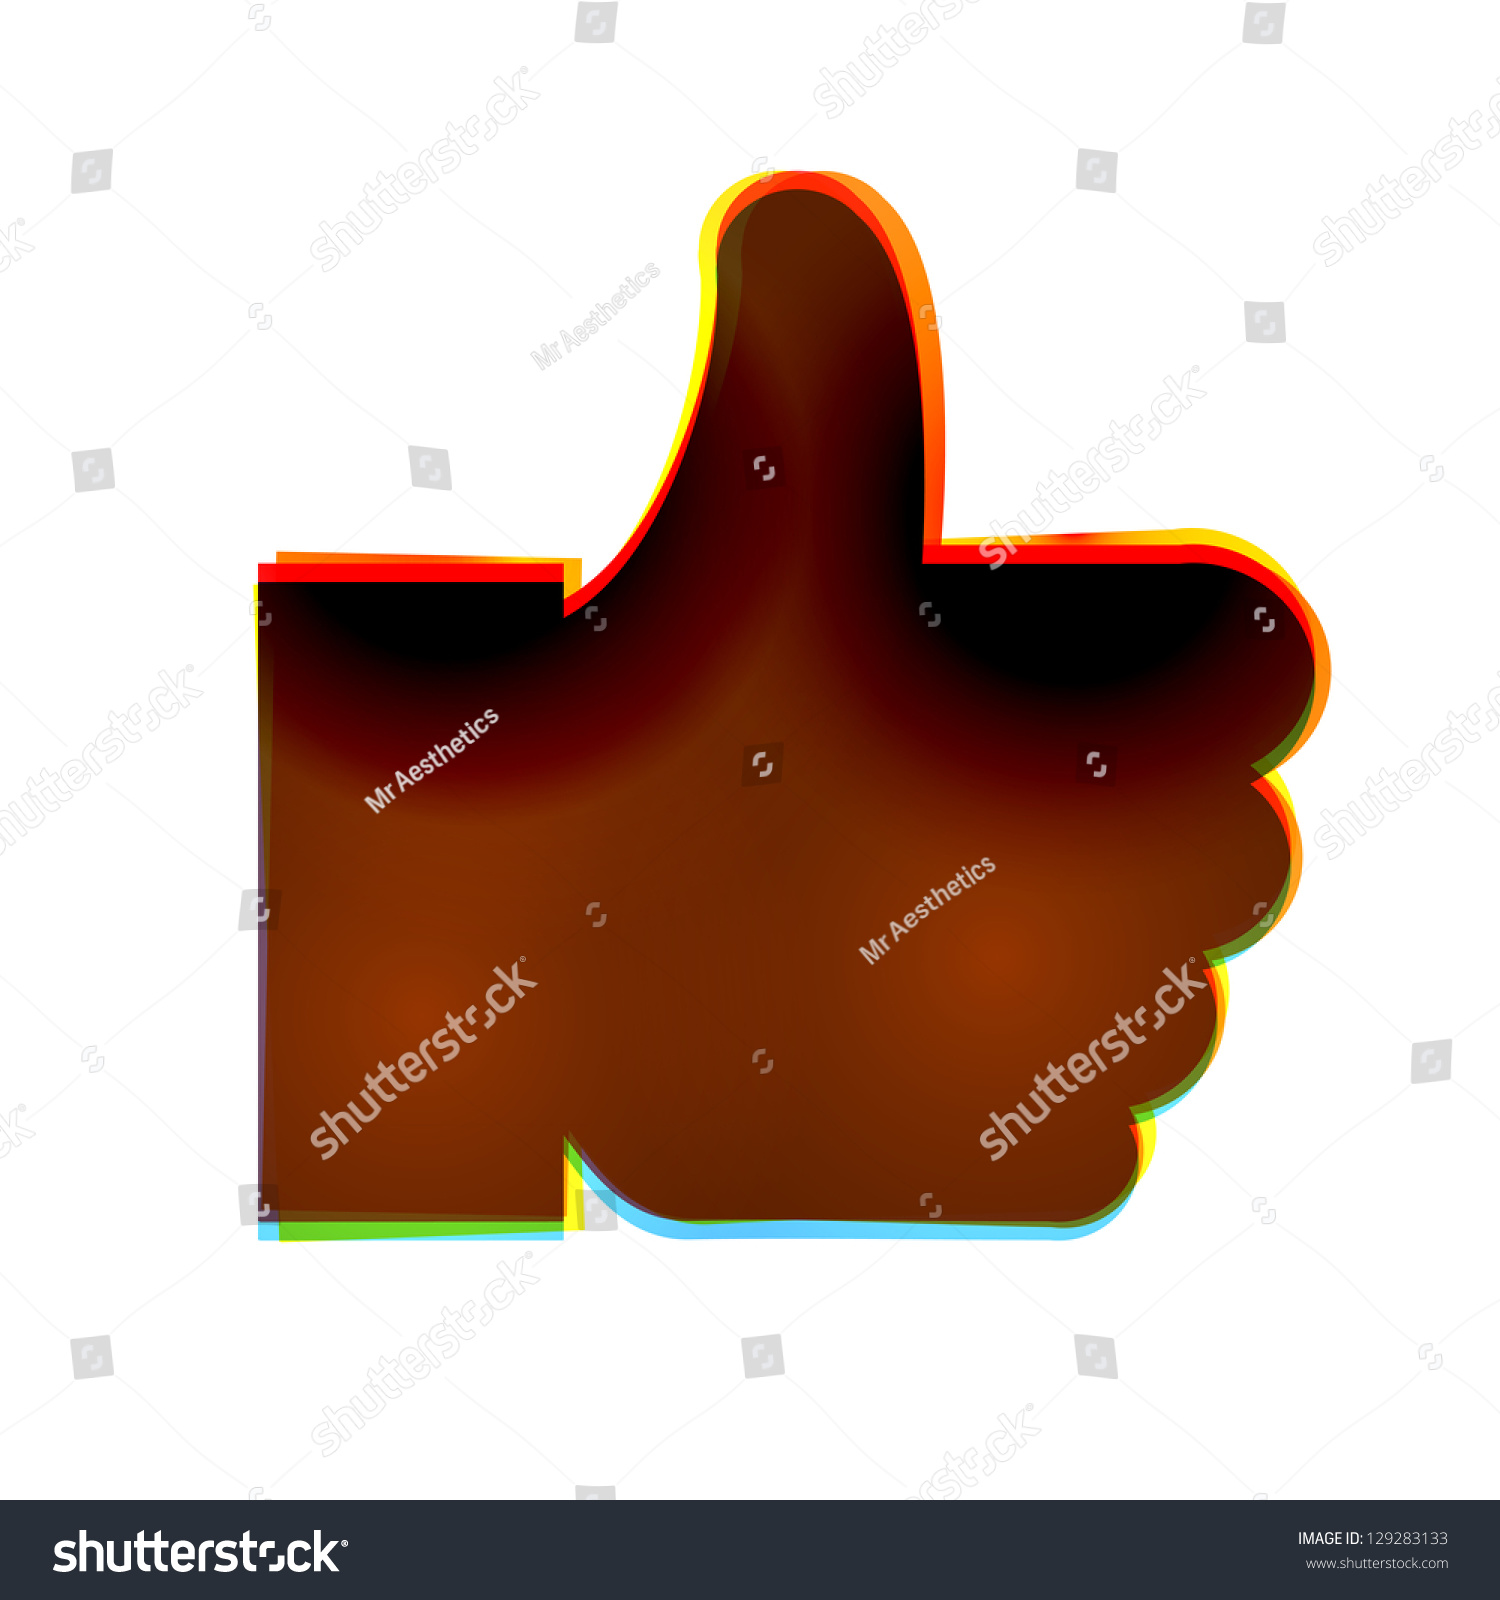 Vector Abstract Icon On White Background. Eps10 - 129283133 : Shutterstock